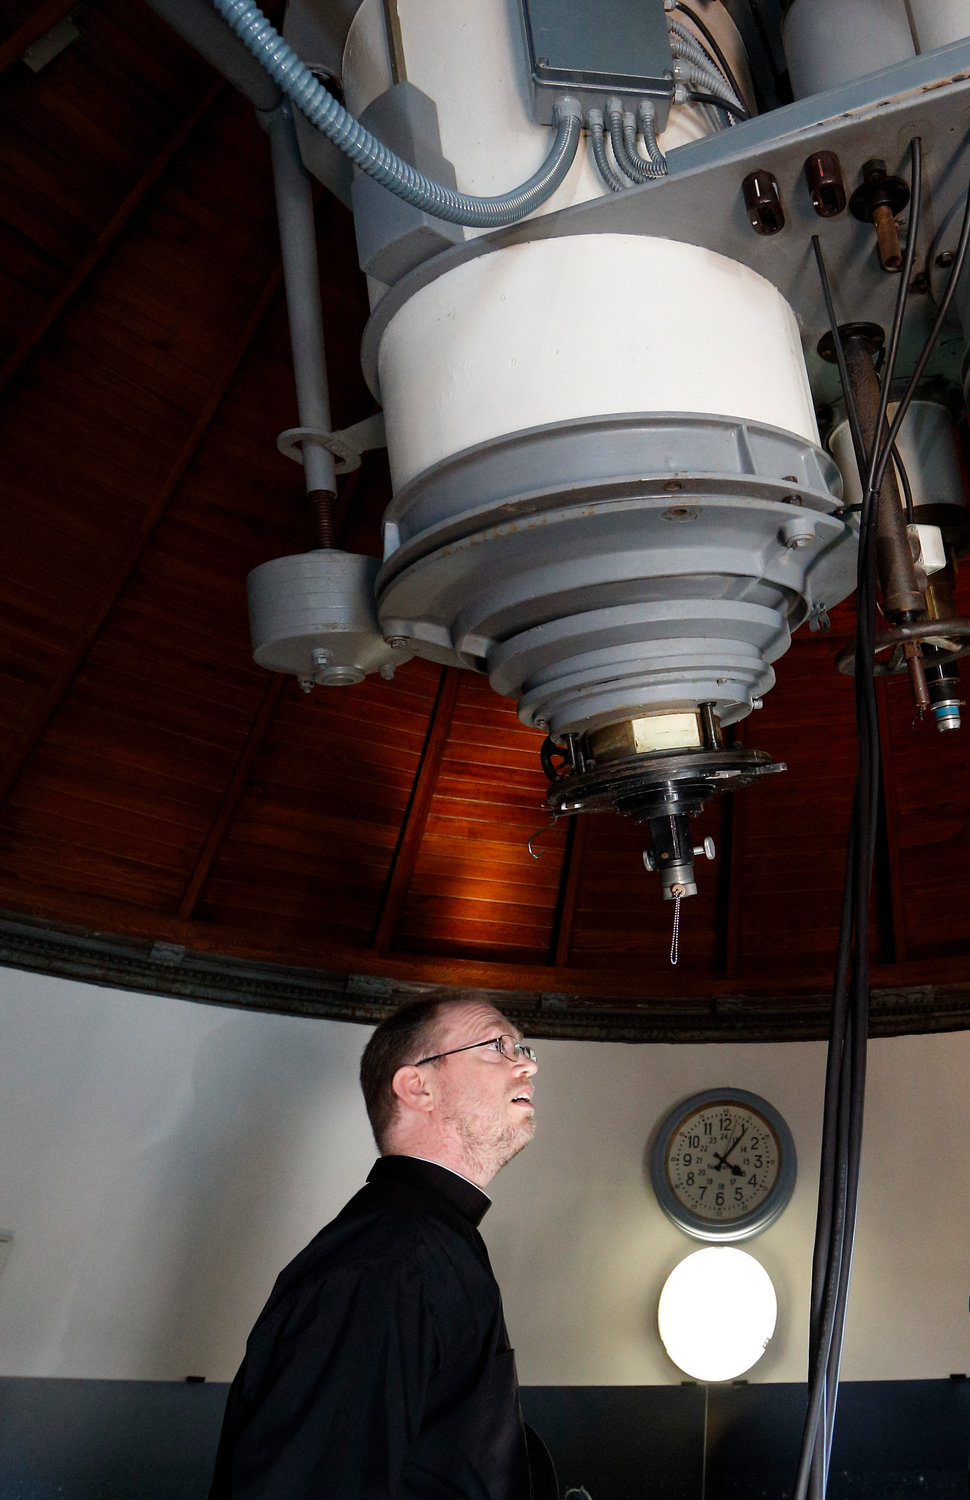 Jesuit Brother Bob Macke looks at a telescope while giving a tour of the Vatican Observatory to journalists at the papal villa at Castel Gandolfo, Italy, Sept. 28, 2018. Brother Macke said that by studying the universe, “we can better appreciate the God who created it.”